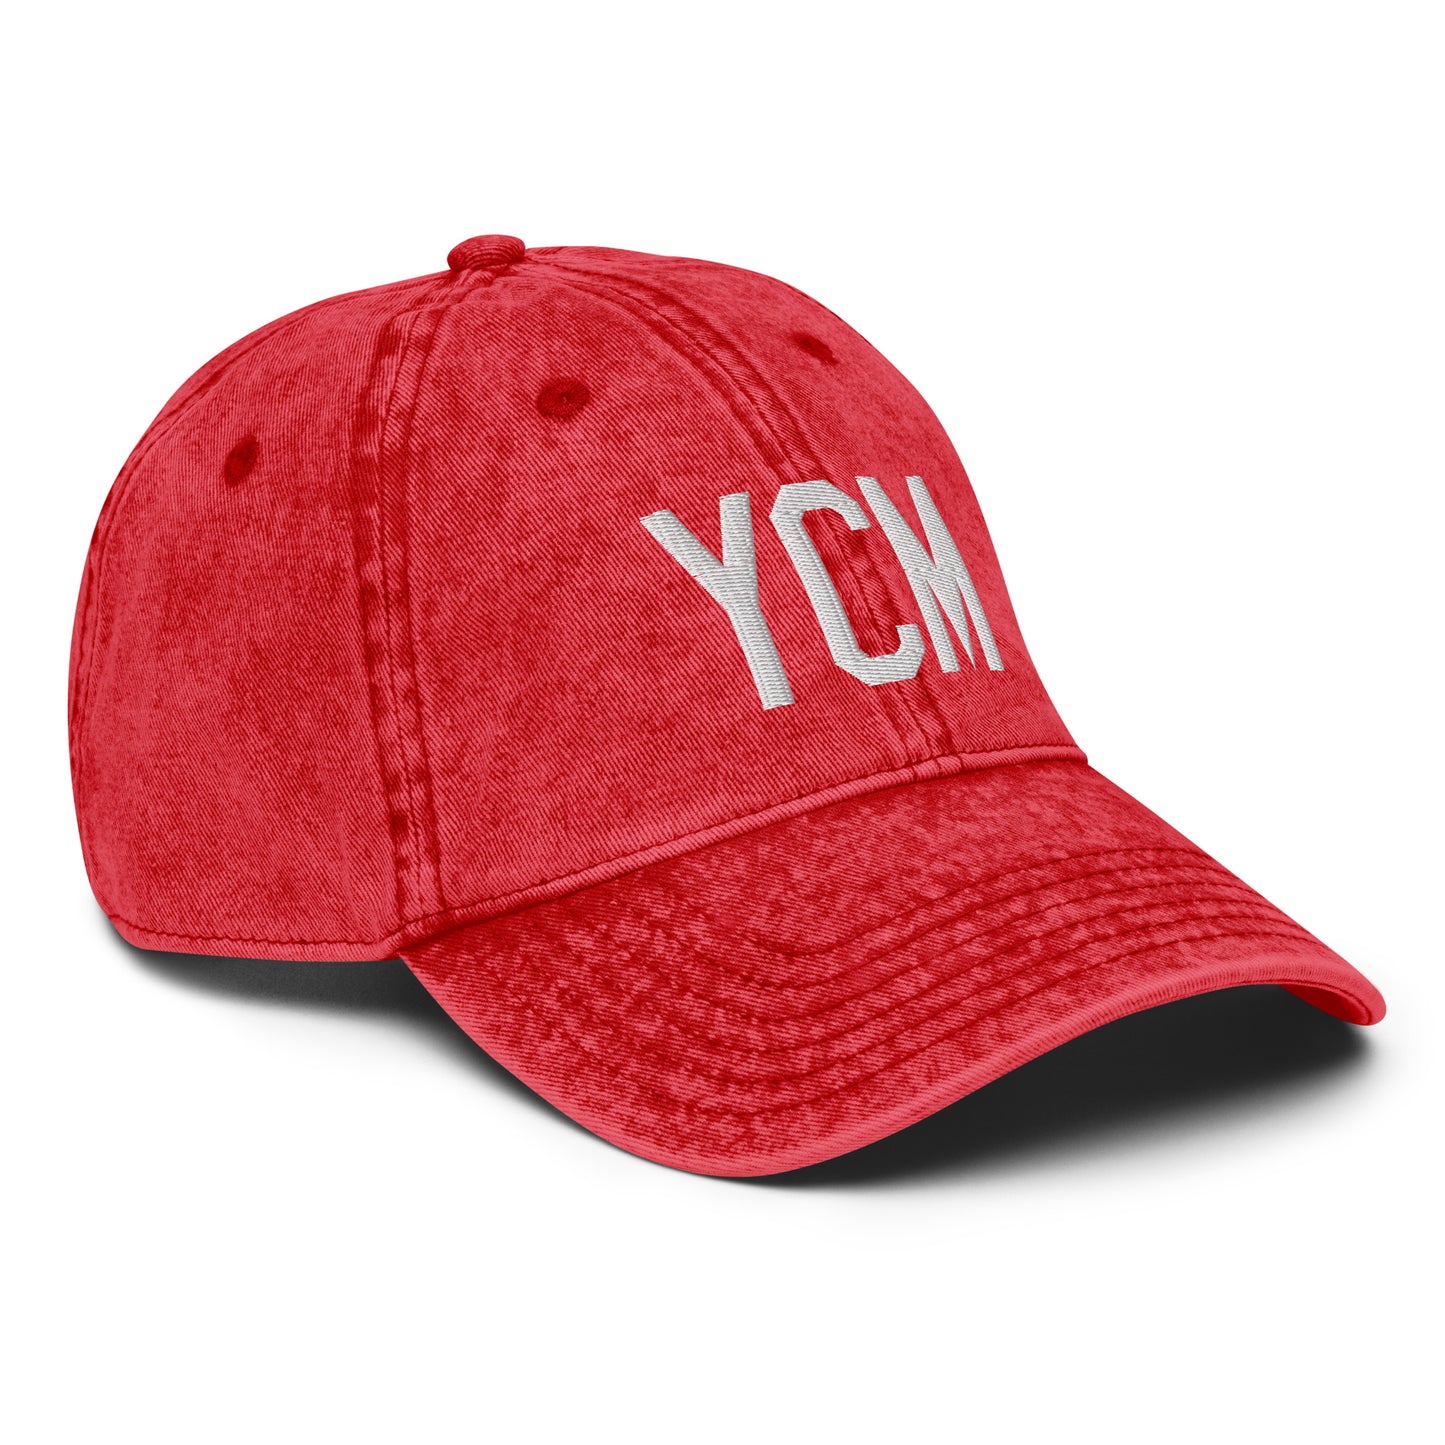 Airport Code Twill Cap - White • YCM St. Catharines • YHM Designs - Image 24